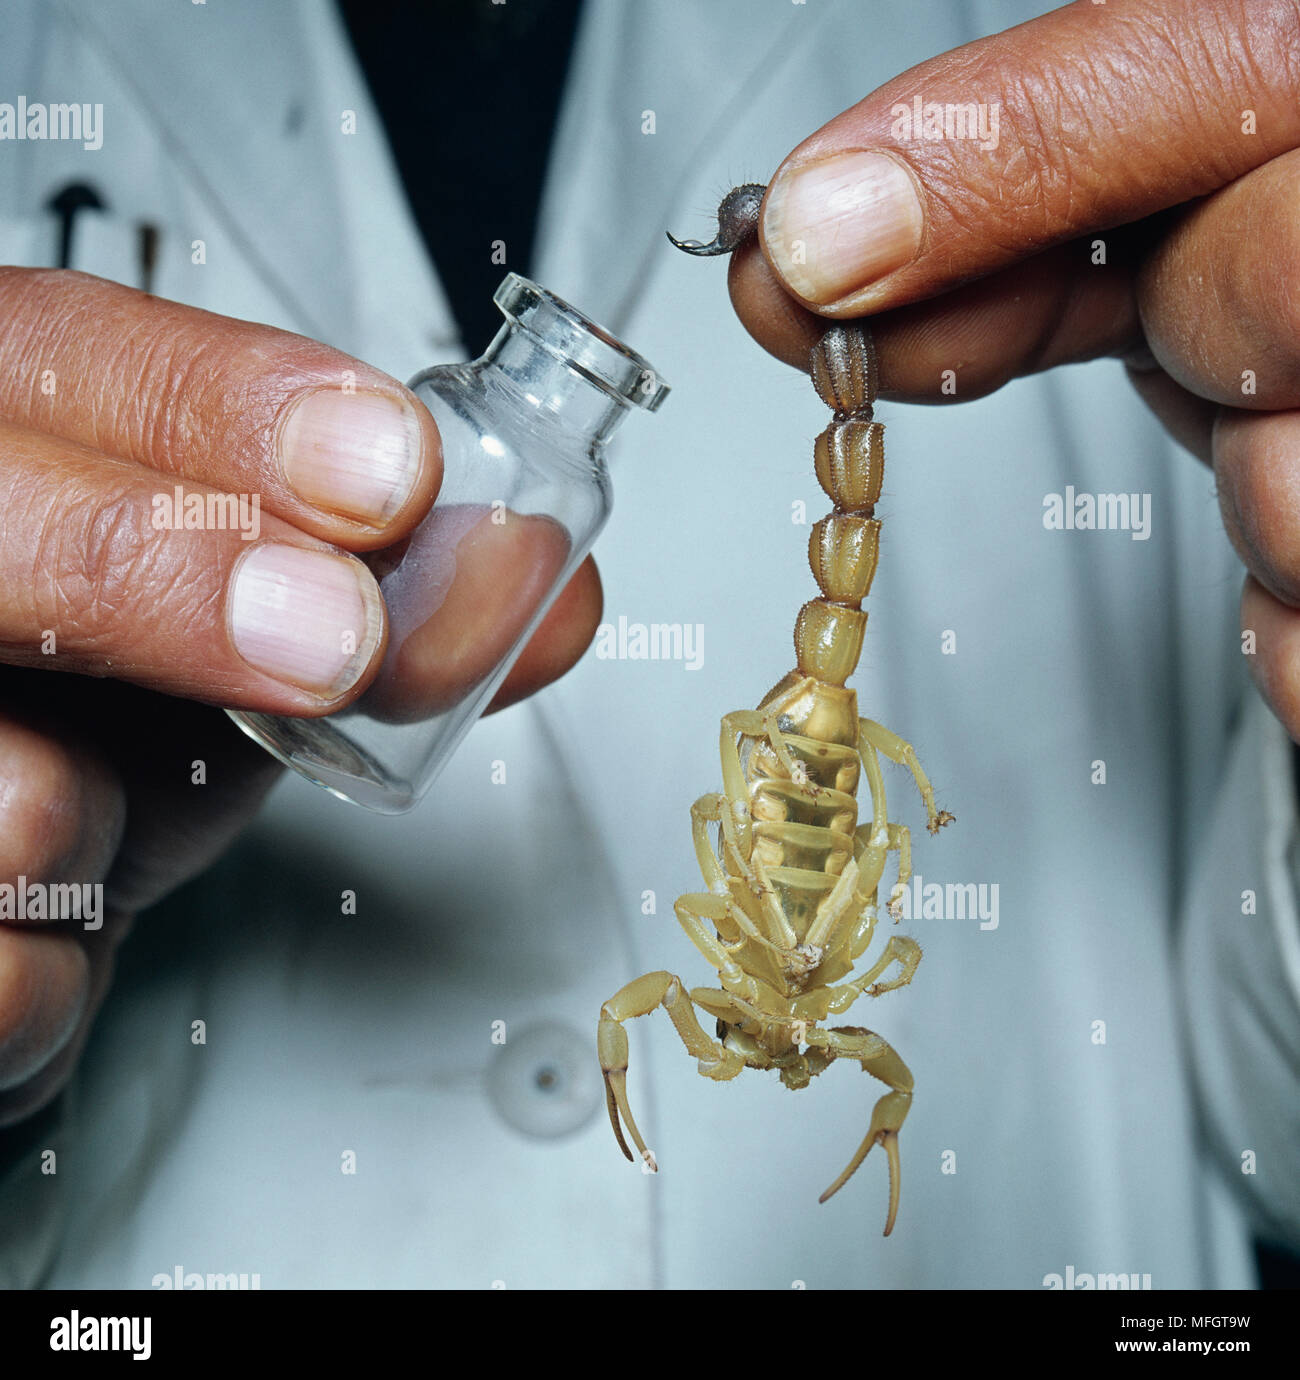 COLLECTING SCORPION VENOM for production of anti-serum  Institute for Medical Research, RSA Stock Photo